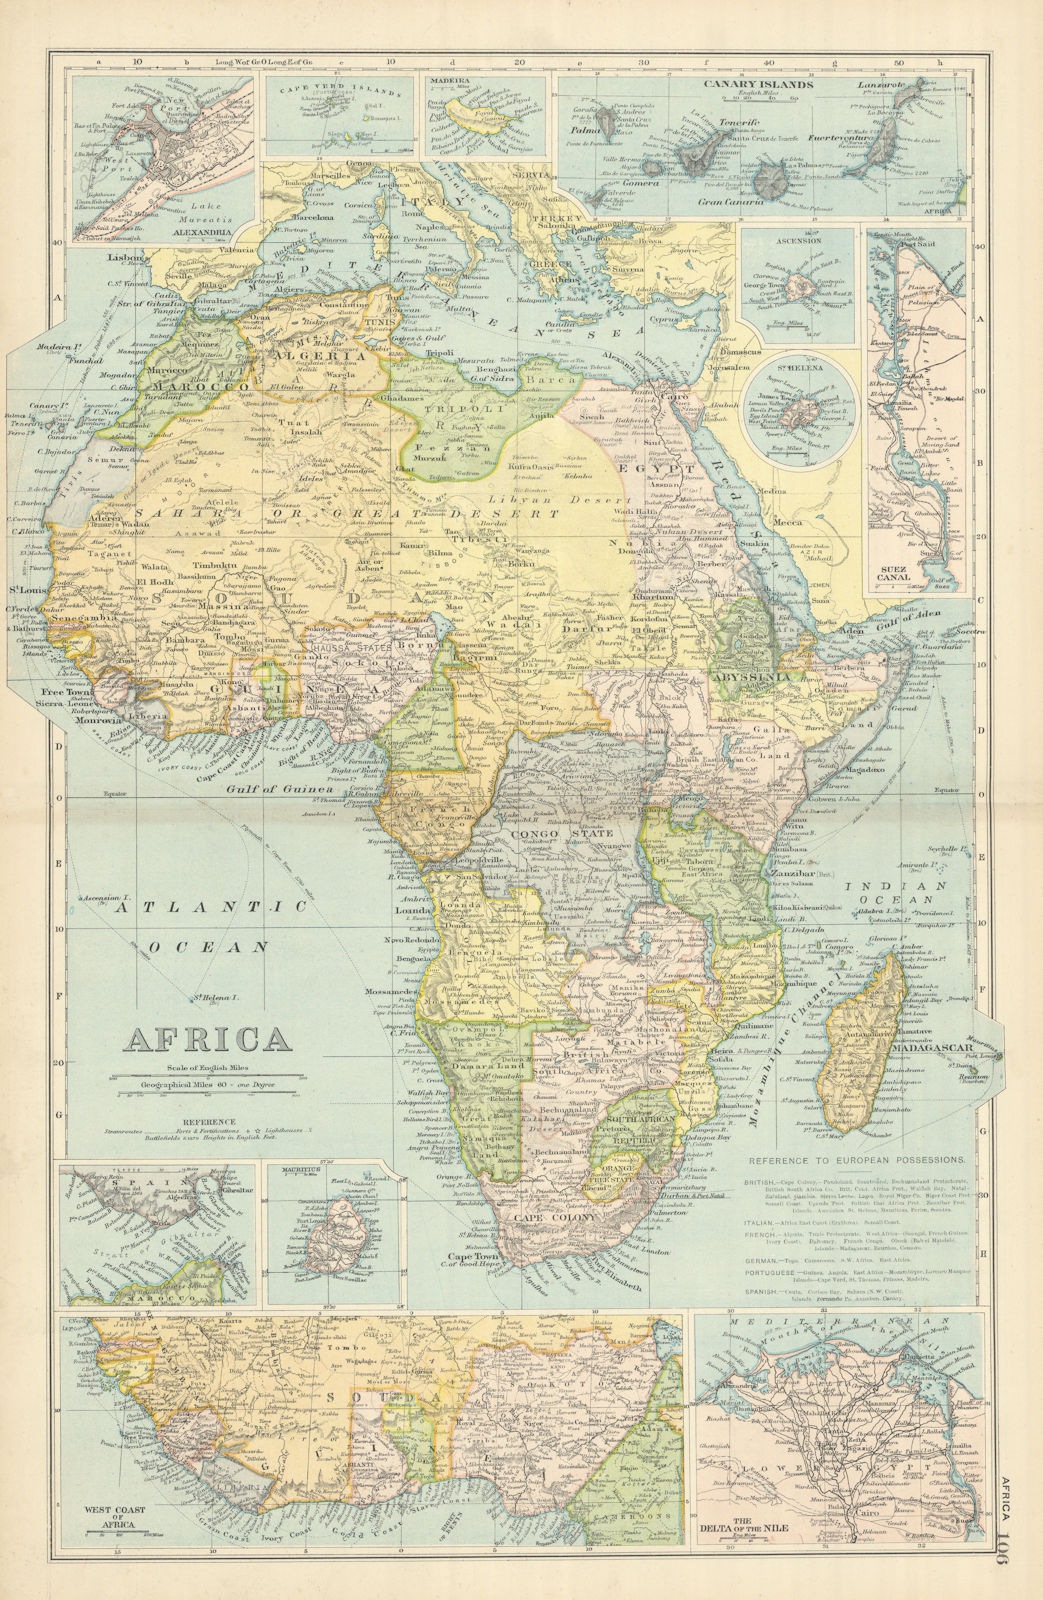 AFRICA French Congo State Soudan Nile Delta Suez canal by GW BACON 1898 map